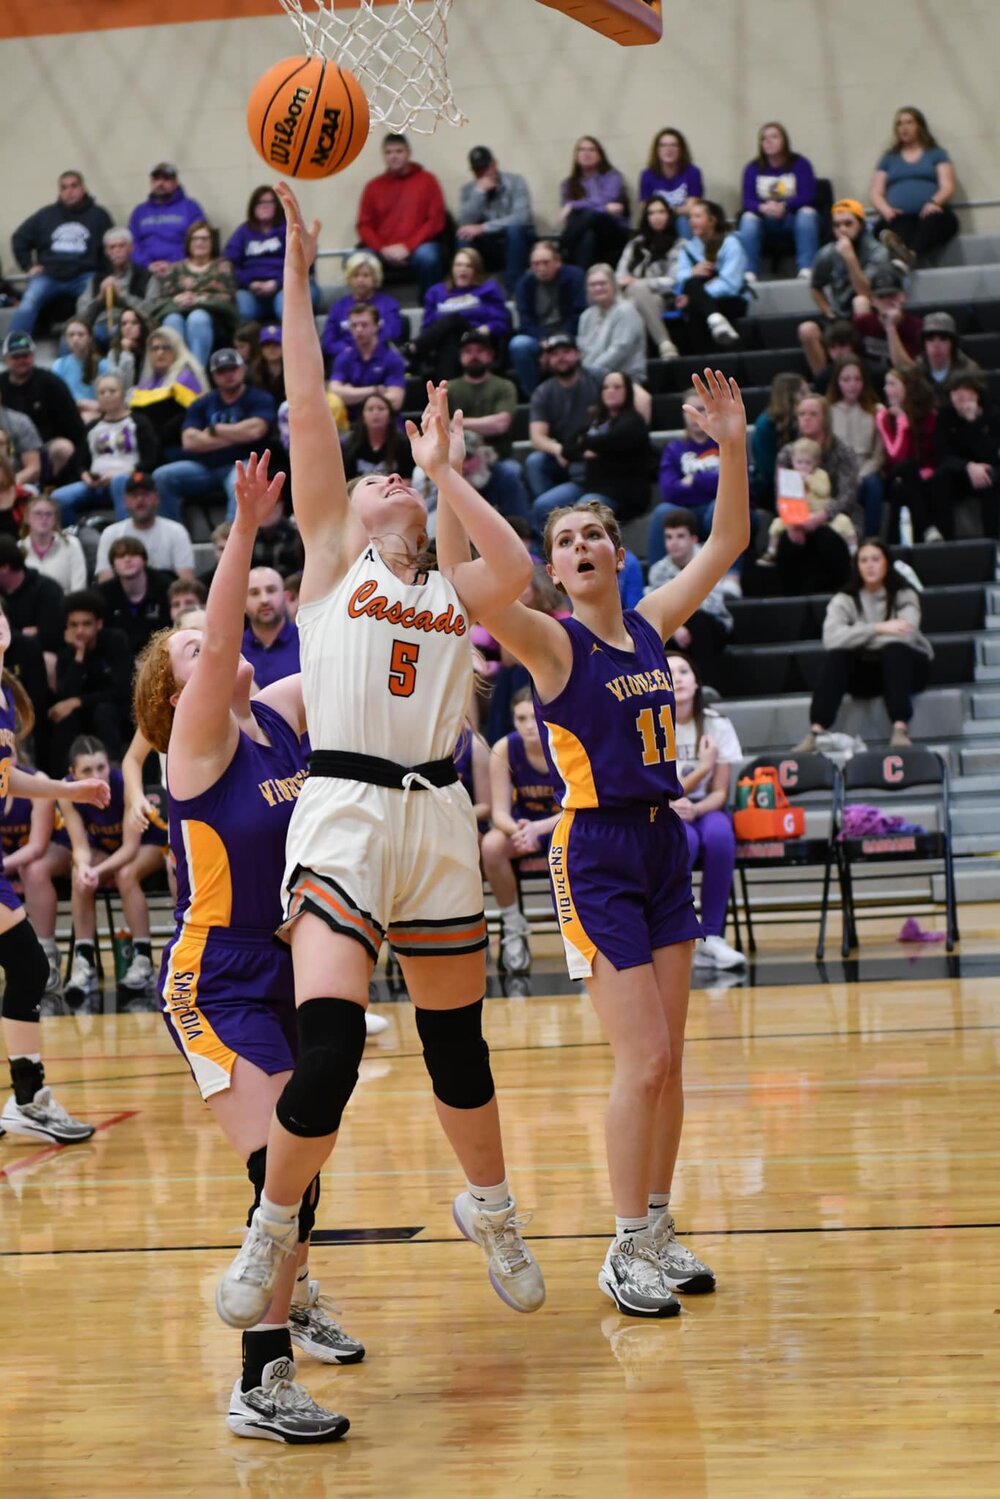 Sophie Ray (5) puts in two of her 13 points in Friday's win against Community.